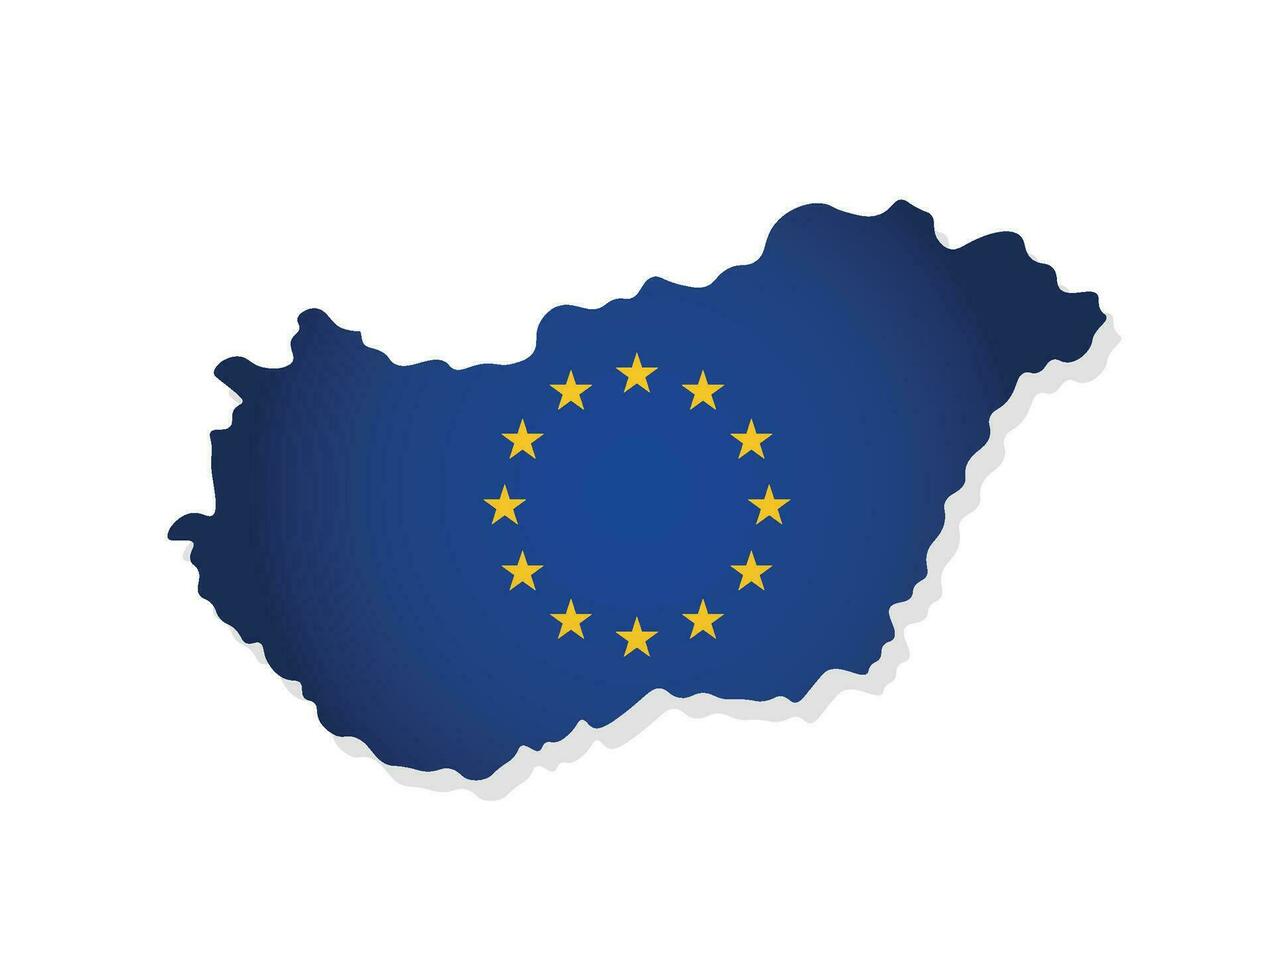 Vector concept with isolated map of member of European Union - Hungary. Modern illustration decorated by the EU flag with yellow stars on blue background